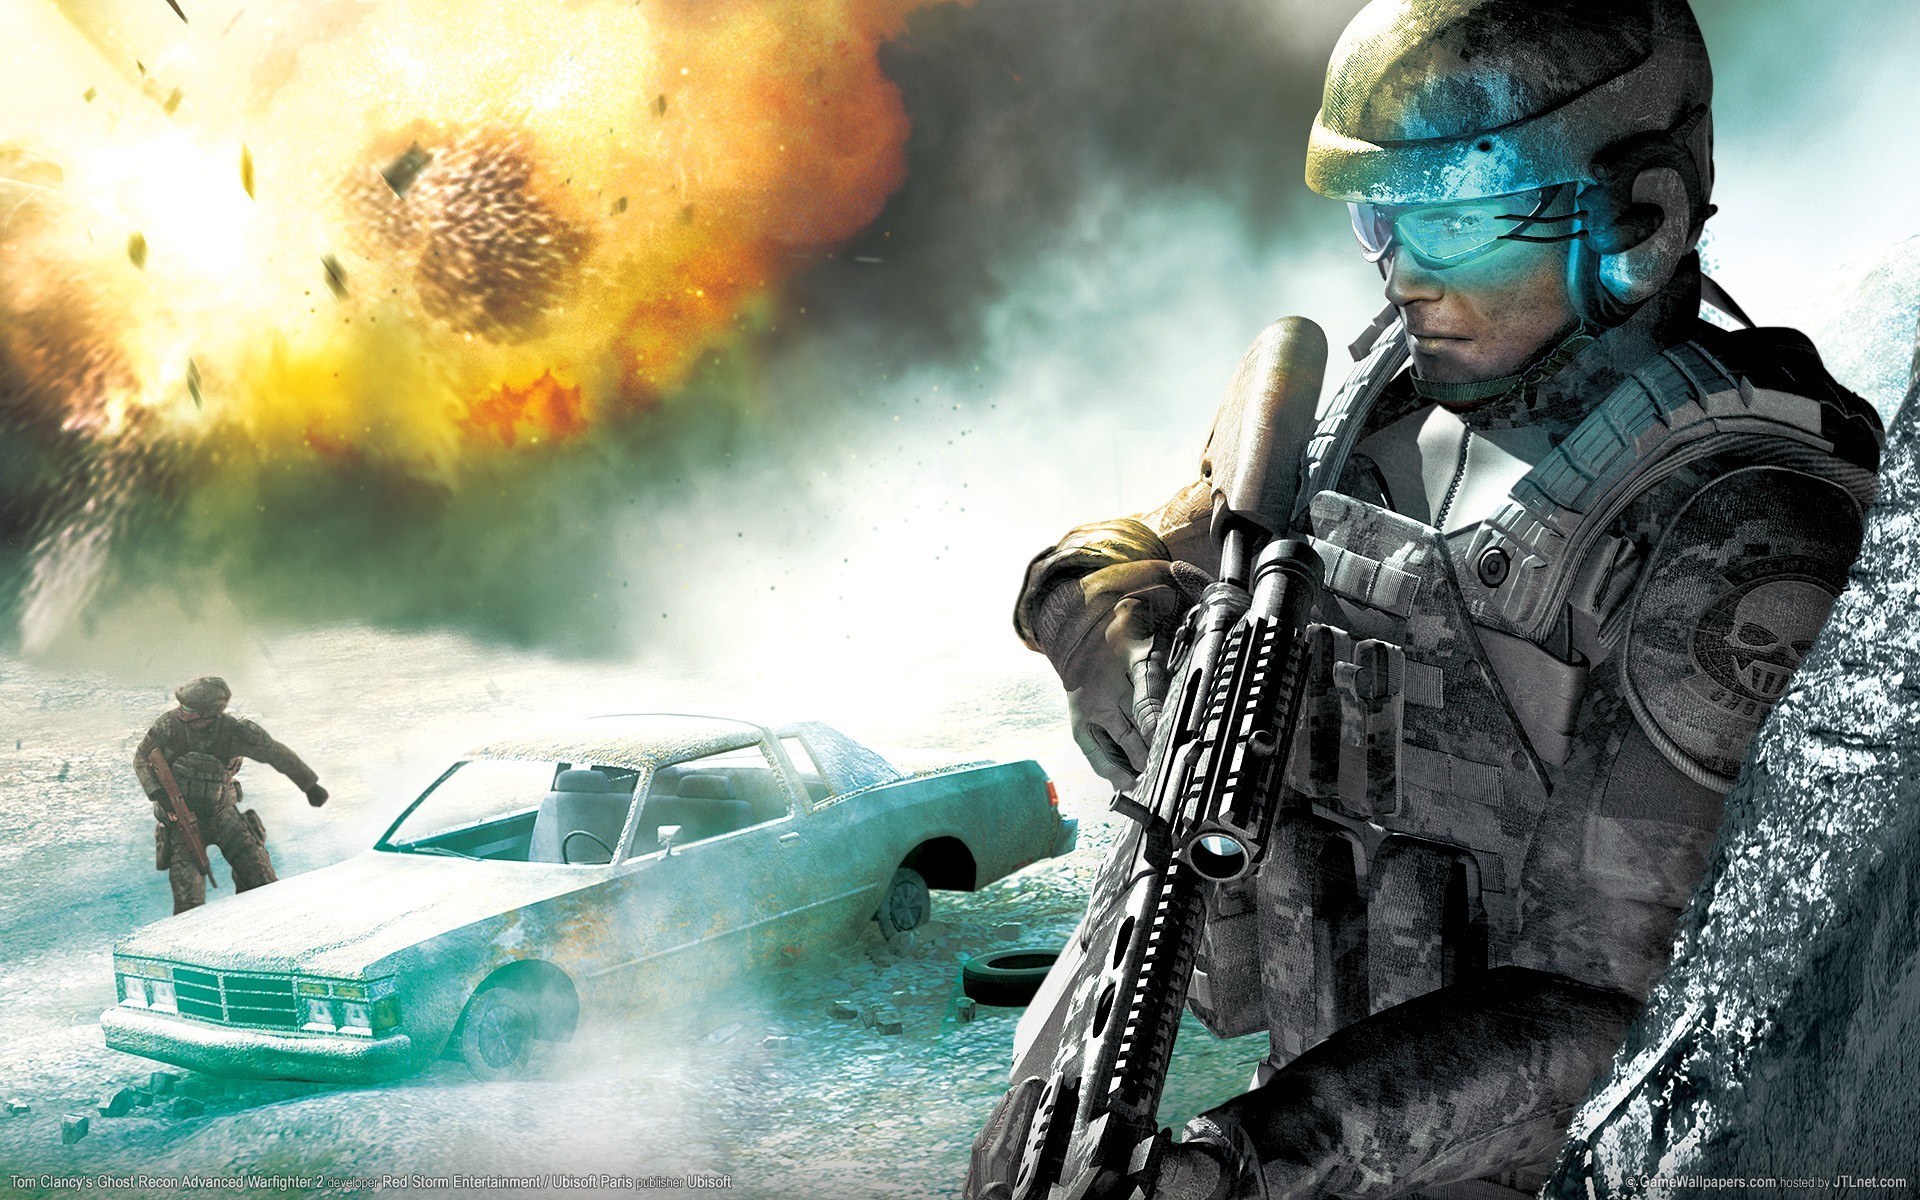 Cool Video Game Backgrounds - Ghost Recon Advanced Warfighter 2 - HD Wallpaper 